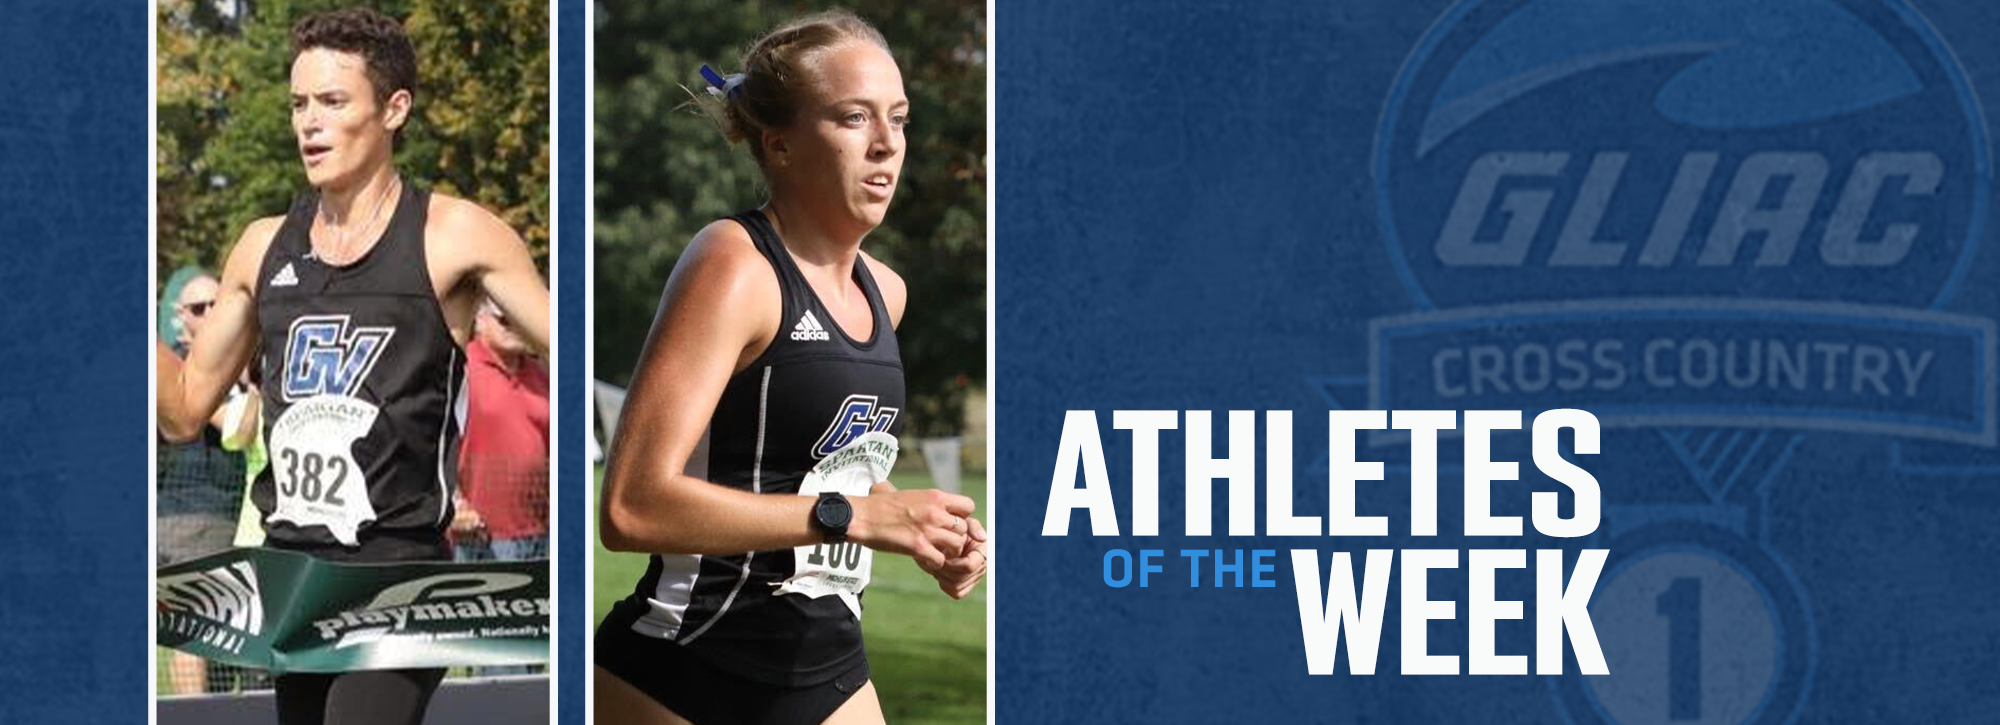 GVSU's Chada and Graber earn athlete of the week honors in cross country